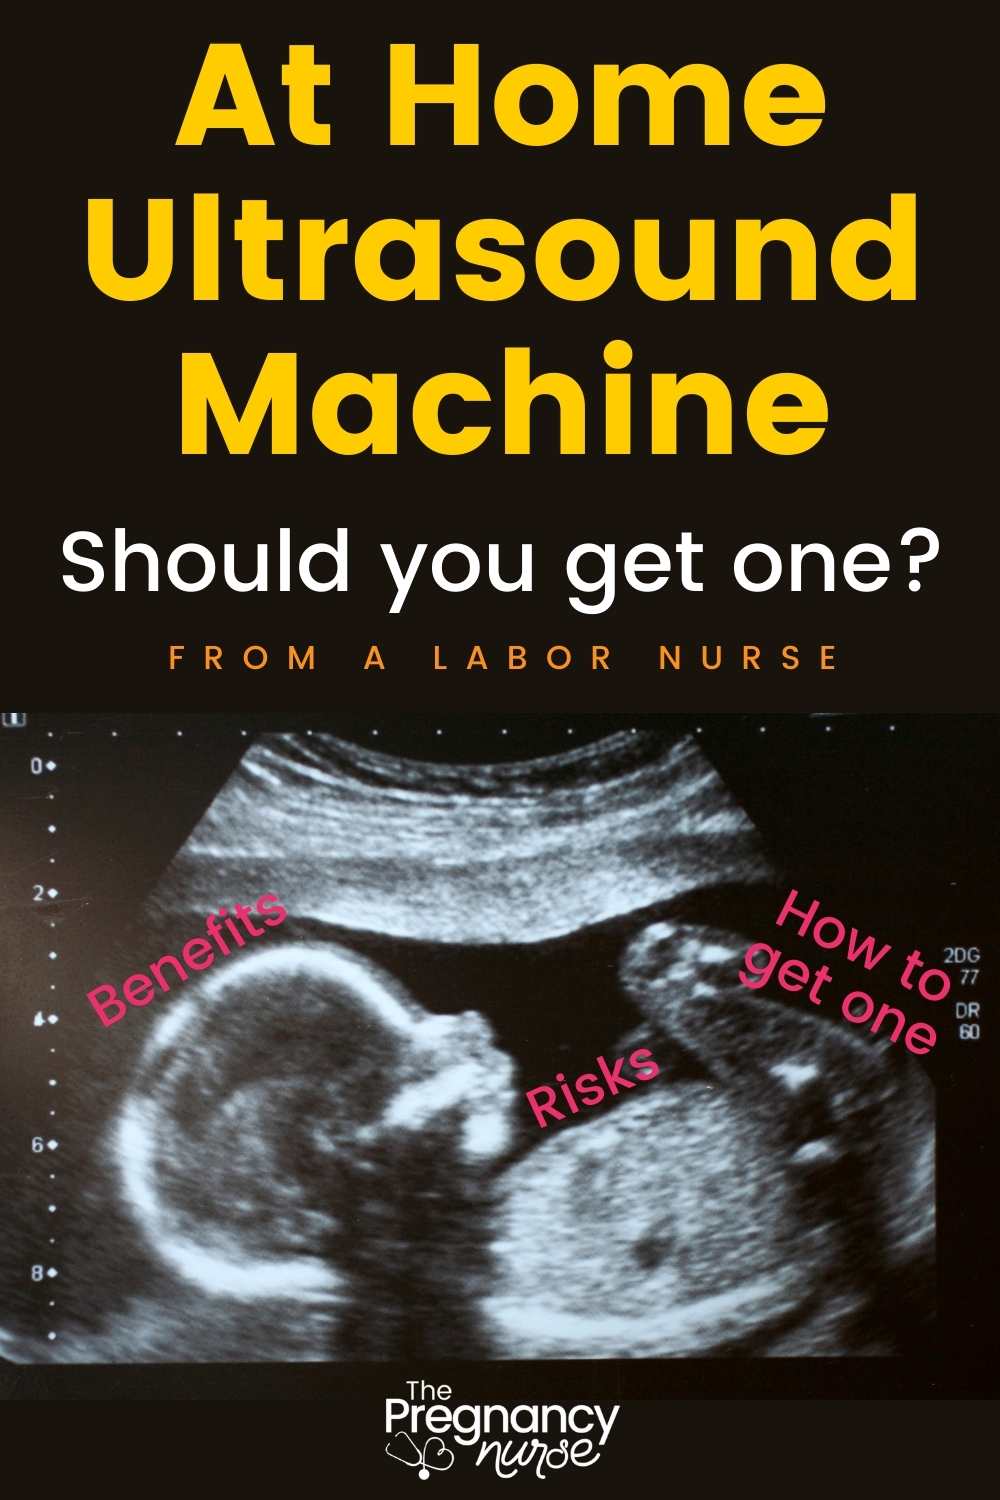 Ultrasounds are a common prenatal diagnostic procedure used to measure the baby and check for general fetal health. Until recently, ultrasounds have only been available in a clinical setting. However, there are now at-home machines. Today we're going to chat about the pro's and con's of these types of machines and where you could find one if you ultimately want one. Disclaimer: The information contained in this article is for educational purposes only and should not be used as a substitute for professional medical advice.